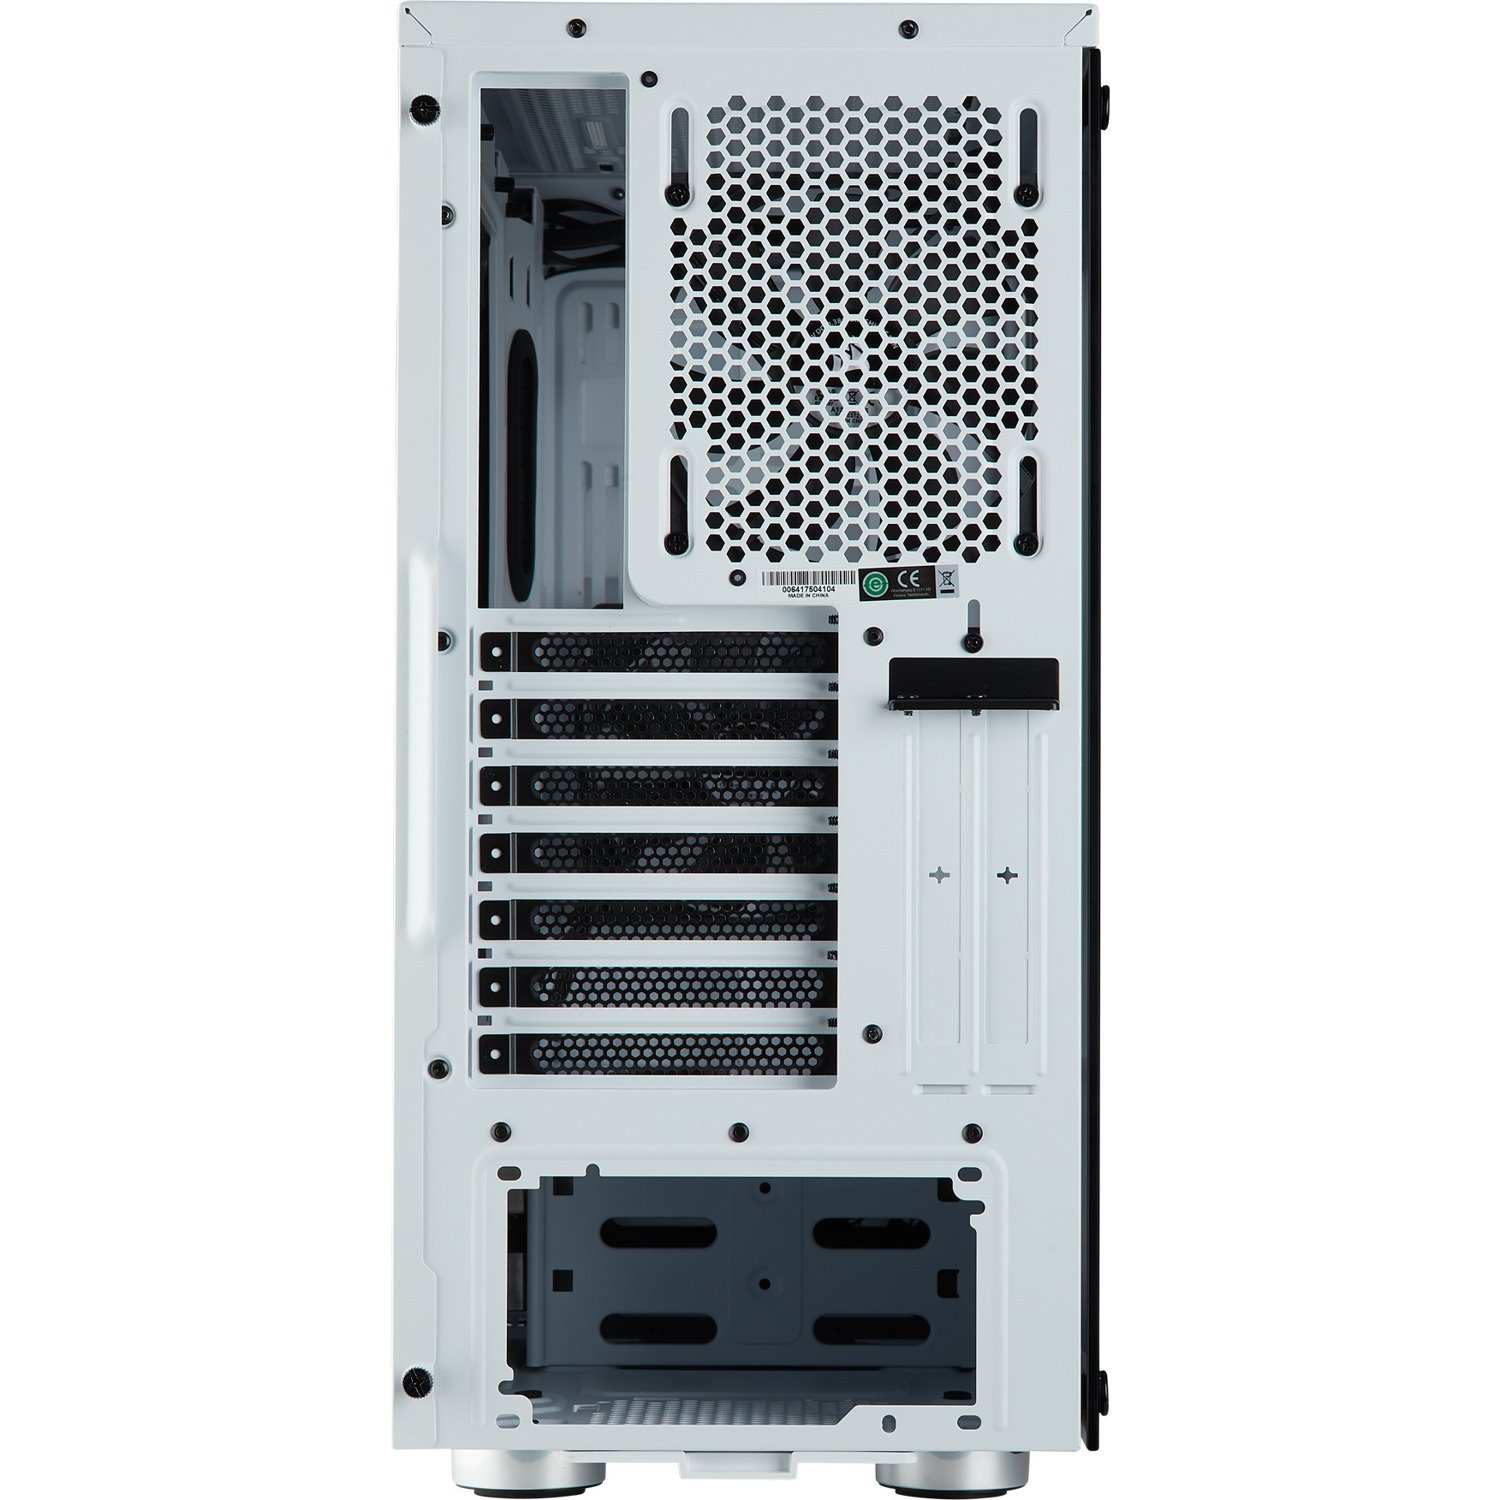 Corsair Carbide 275R Computer Case - ATX Motherboard Supported - Mid-tower - Steel, Plastic, Tempered Glass - White